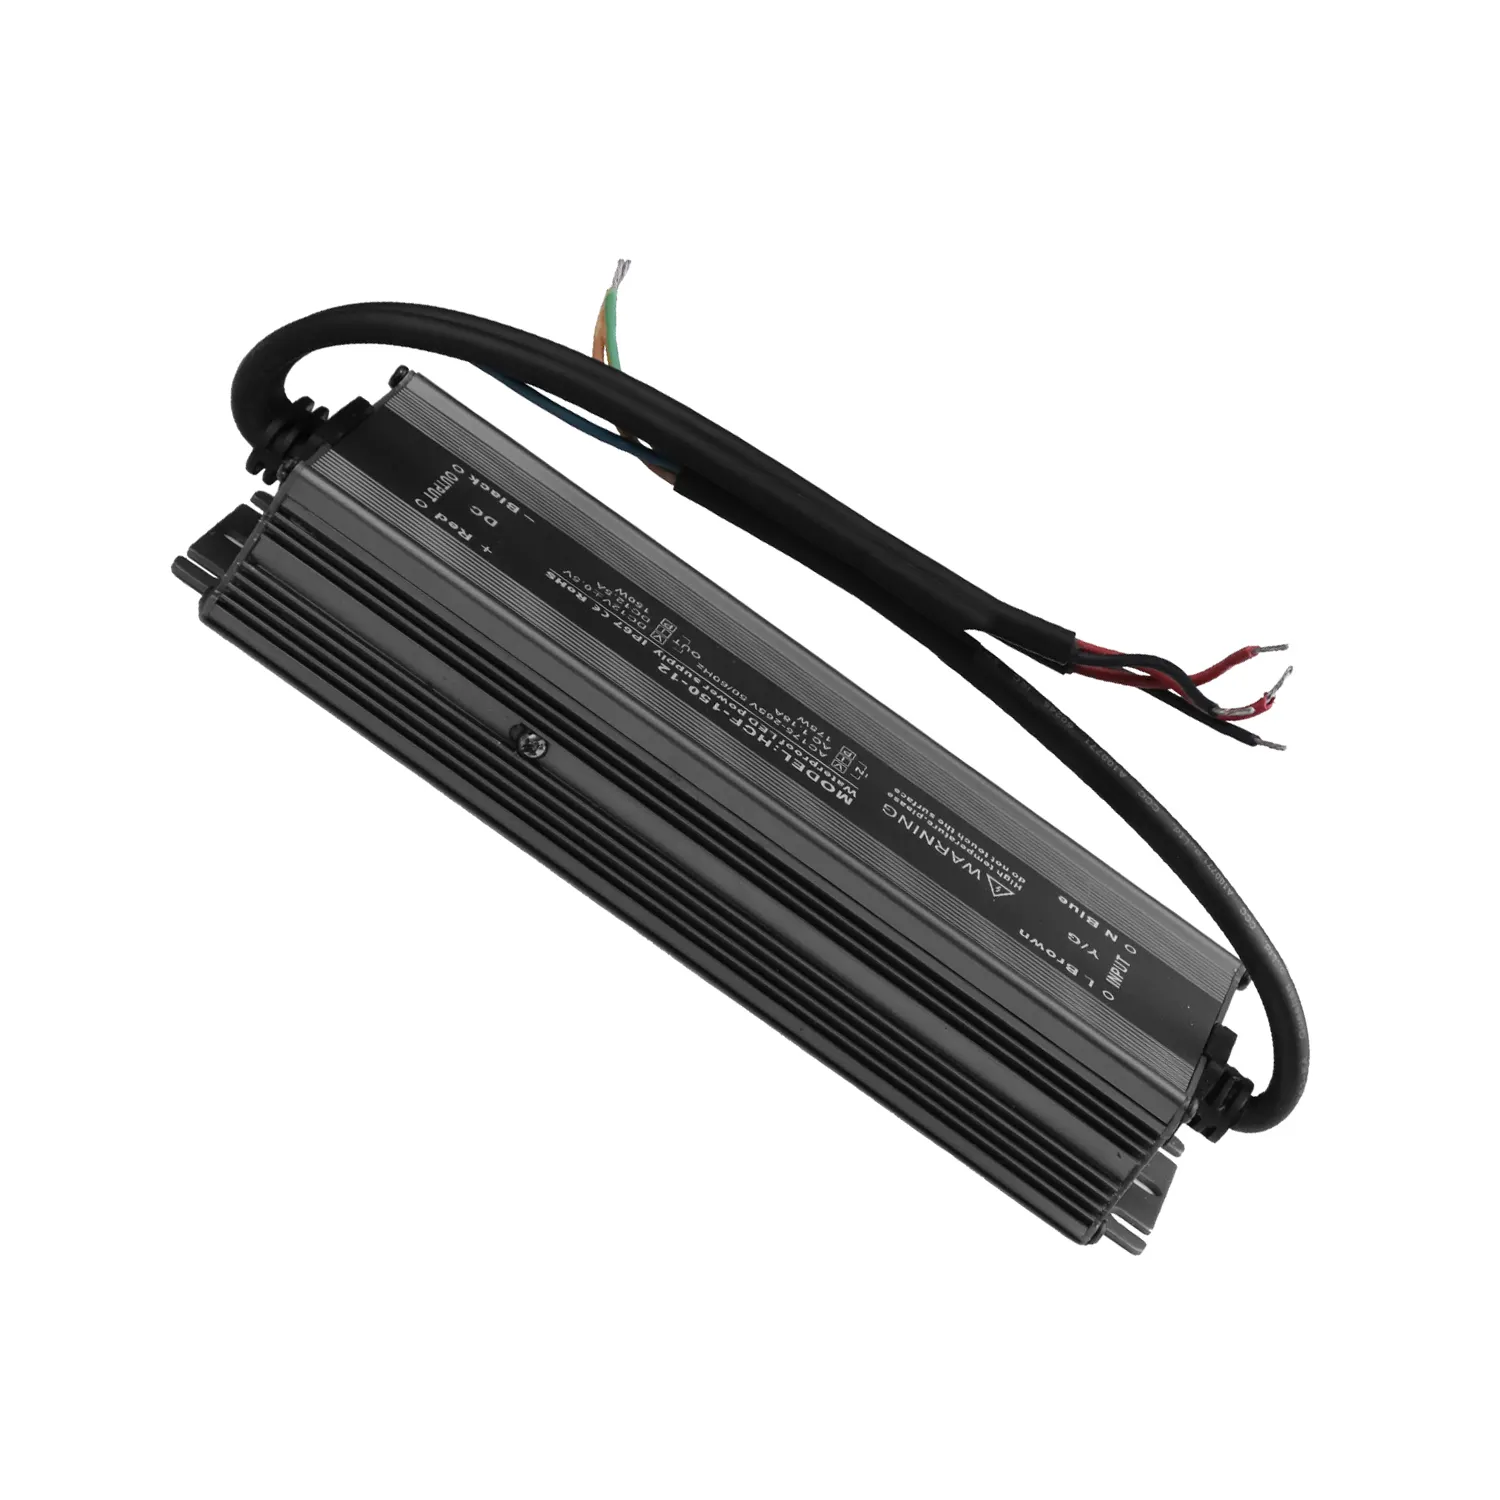 12V 24V 48V 2a 3a 5a 8a 10a 15a 20a 30a 20W 36W 60W 100W 120W 150W 200W 300W 400W 600W Waterdichte Voeding Led Driver Ip67